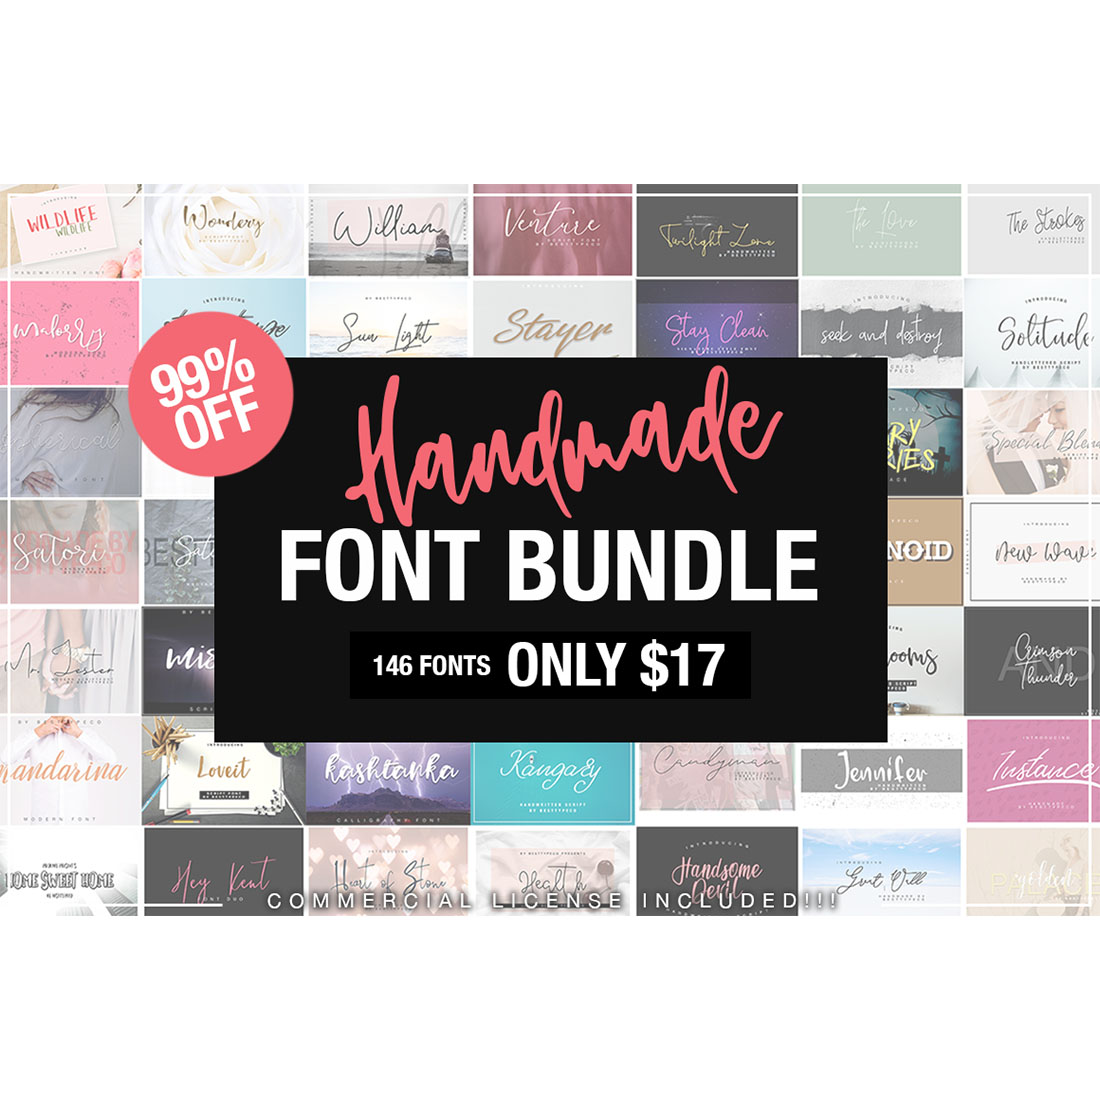 Font Bundles 146in1 SuperSALE cover image.